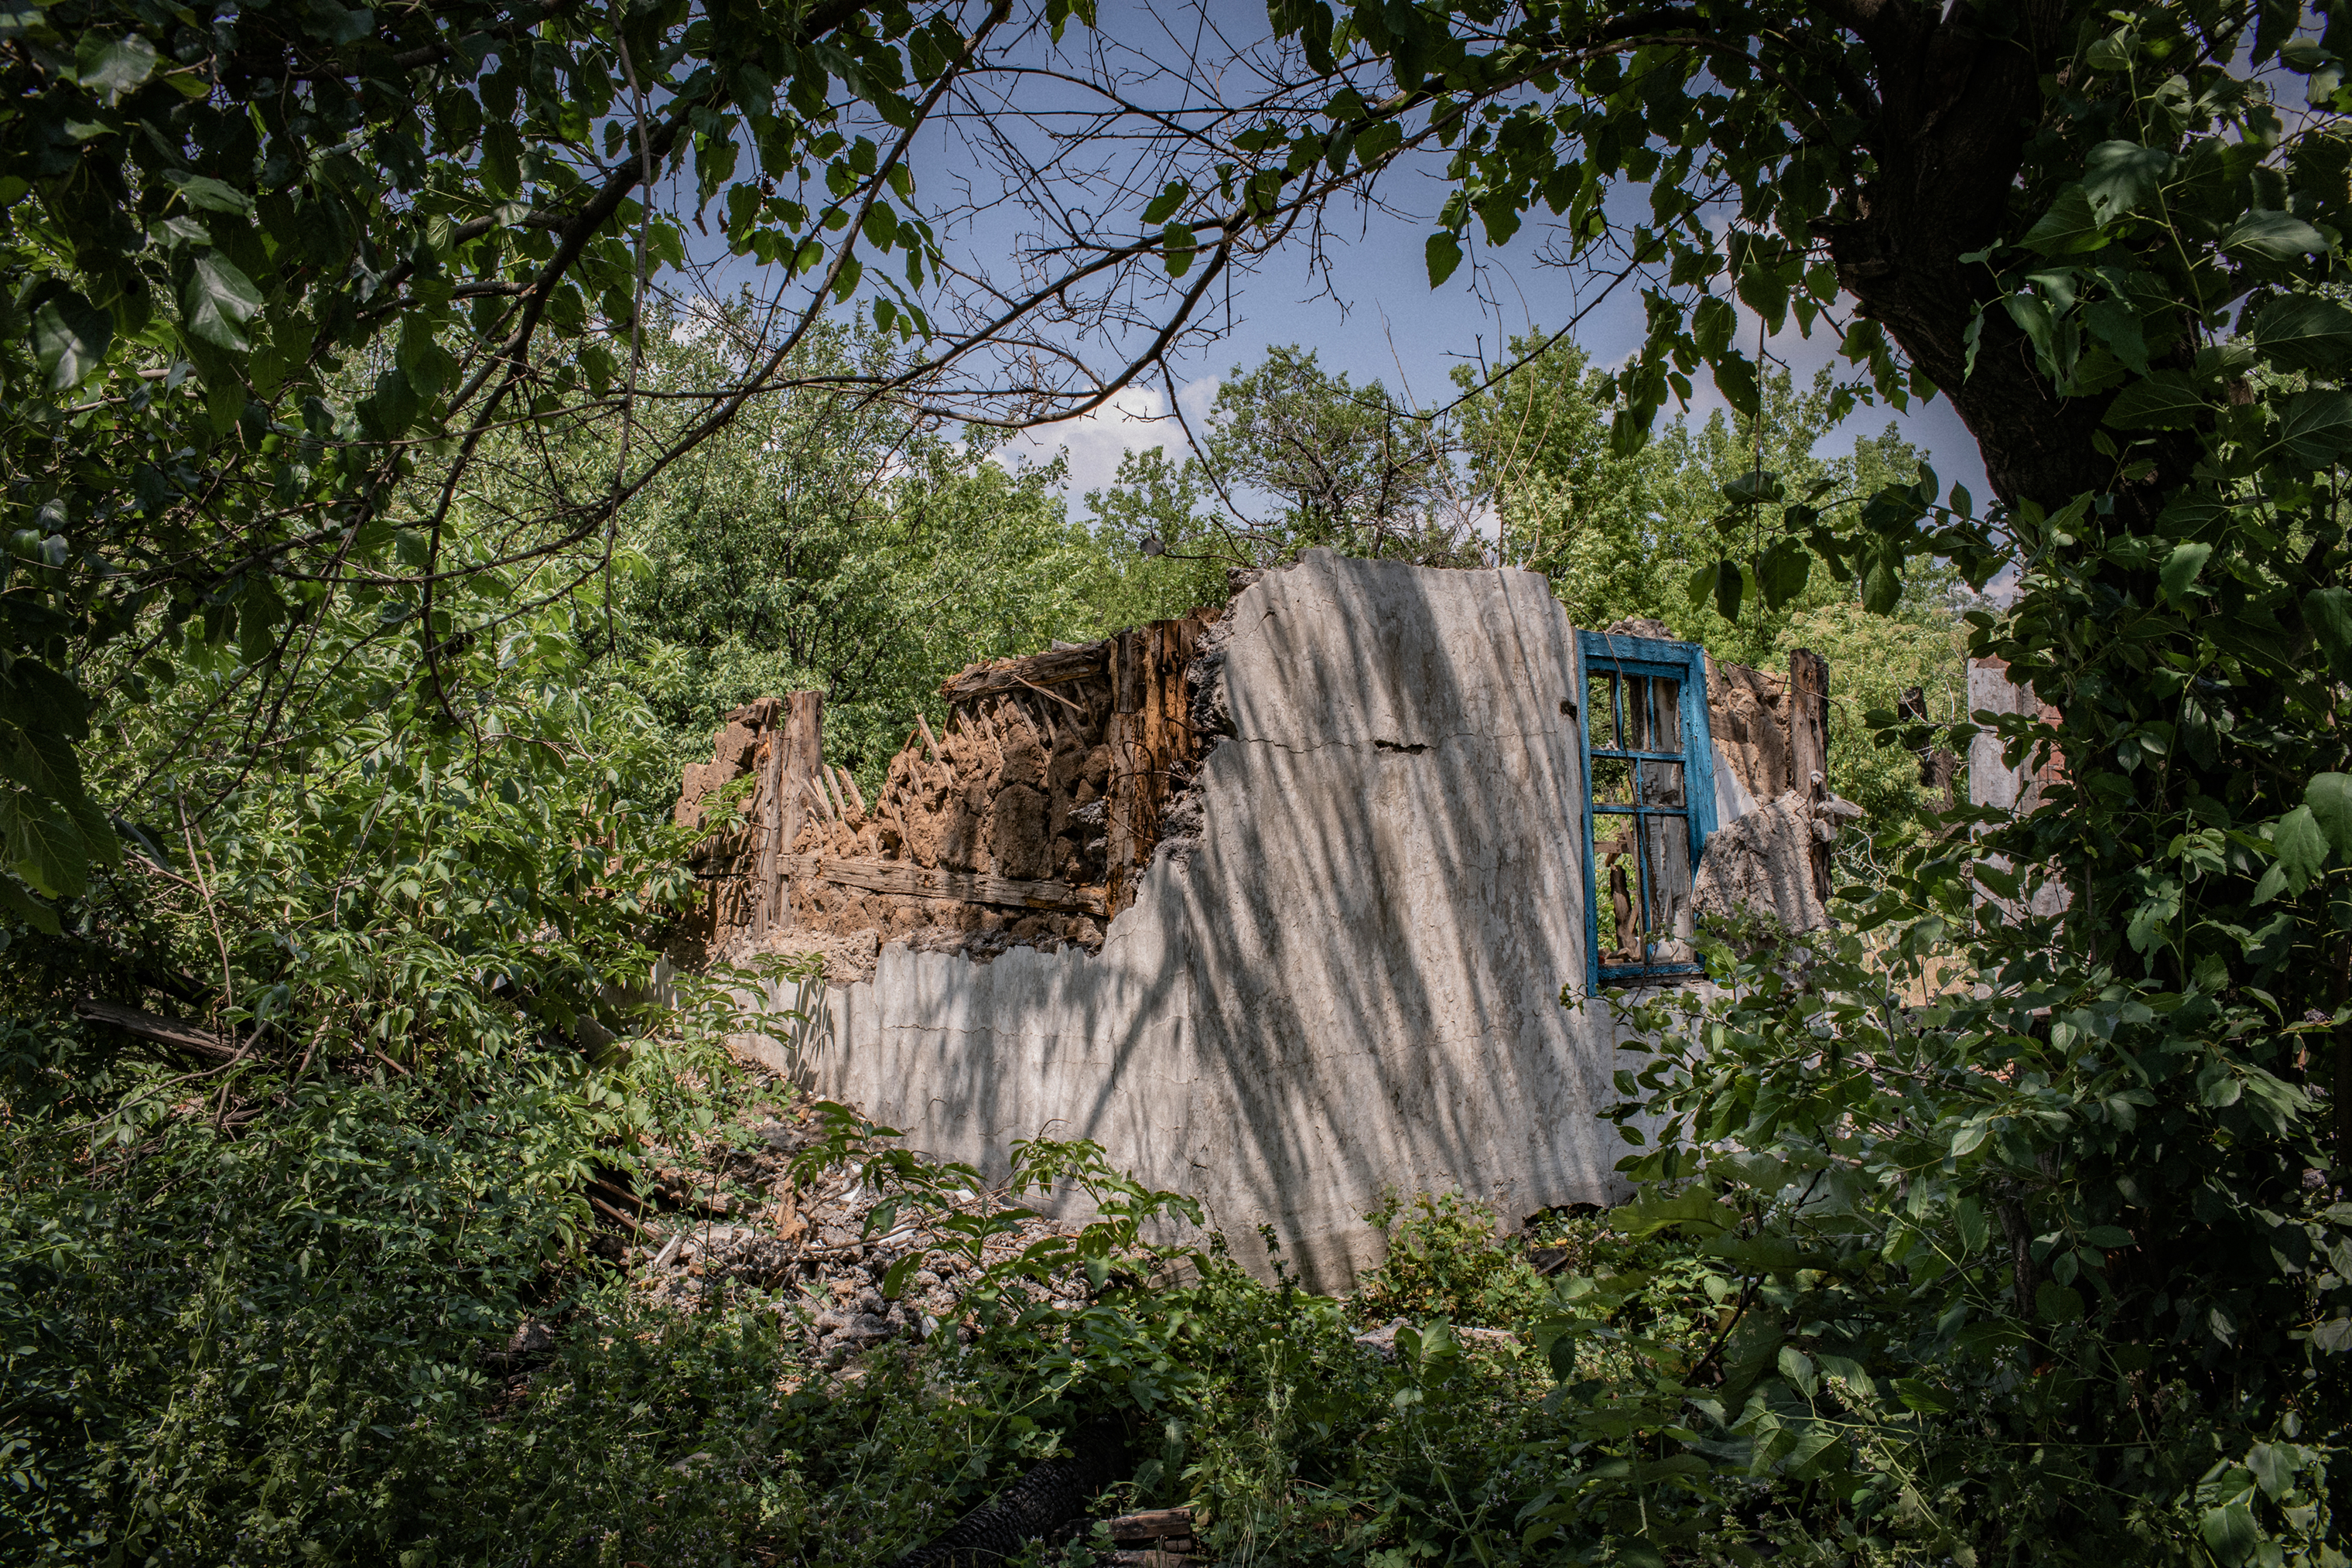 A house that was destroyed by shelling in Yuzhnaya, a frontline area near Toretsk. It's easy for outsiders to see only broken walls, collapsed ceilings and a mess of the mutilated furniture and wallpaper. Yet locals still see their homes, and carry stories about the lives they lived in them. (Anastasia Taylor-Lind for eyeWitness)